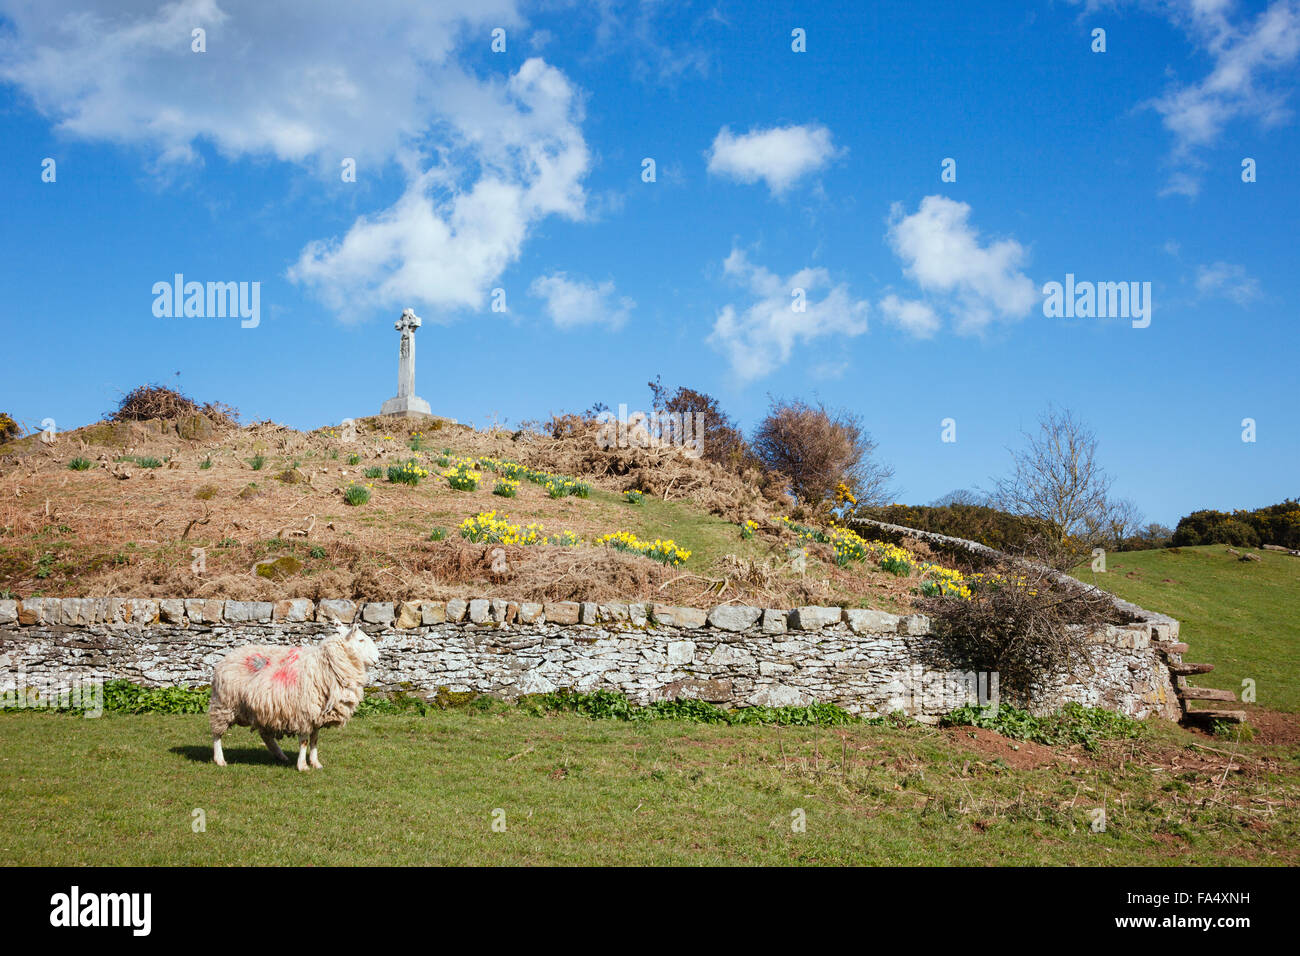 Sheep in field by The Morris Memorial celtic cross to Lewis, Richard and William  founders of Cymmrodorion Society. Anglesey Stock Photo